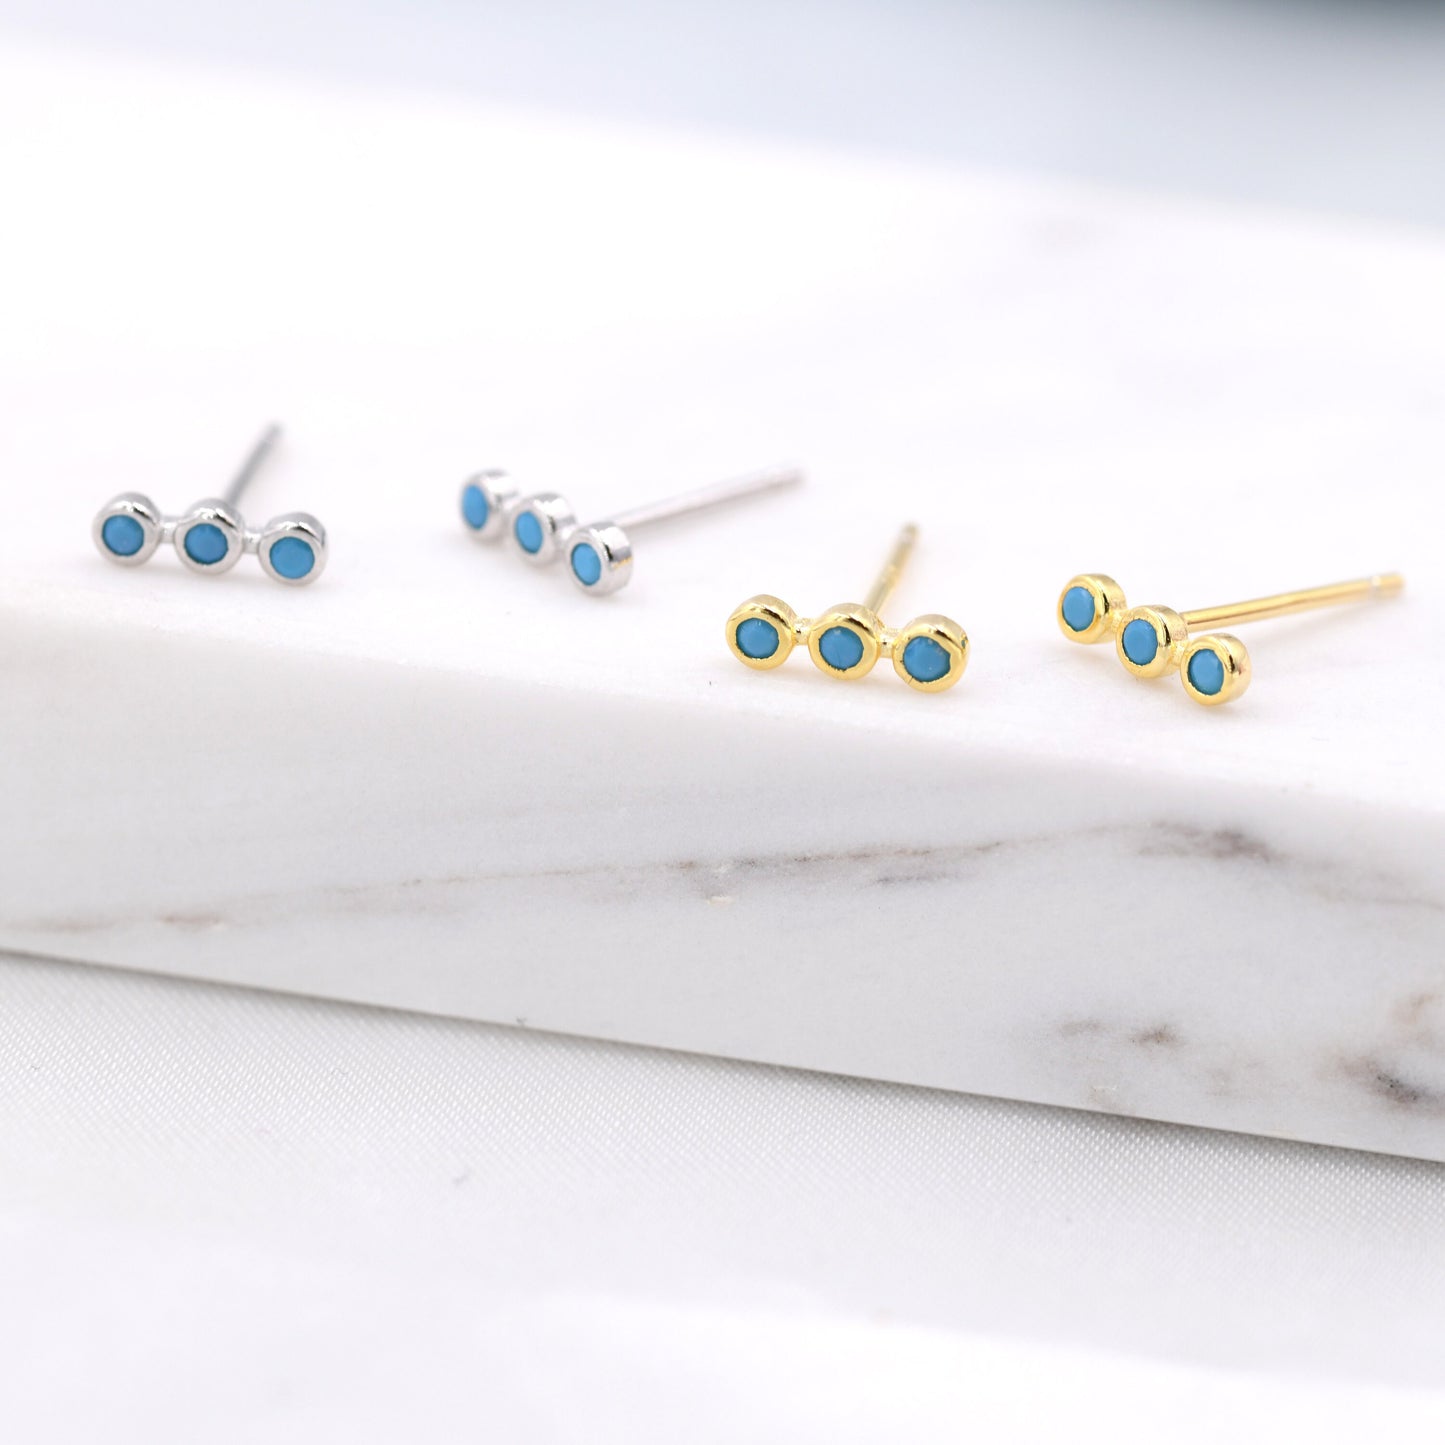 Extra Tiny Turquoise Bar Stud Earrings in Sterling Silver, Silver or Gold,  Three Dot Earrings, Blue Bar Earrings